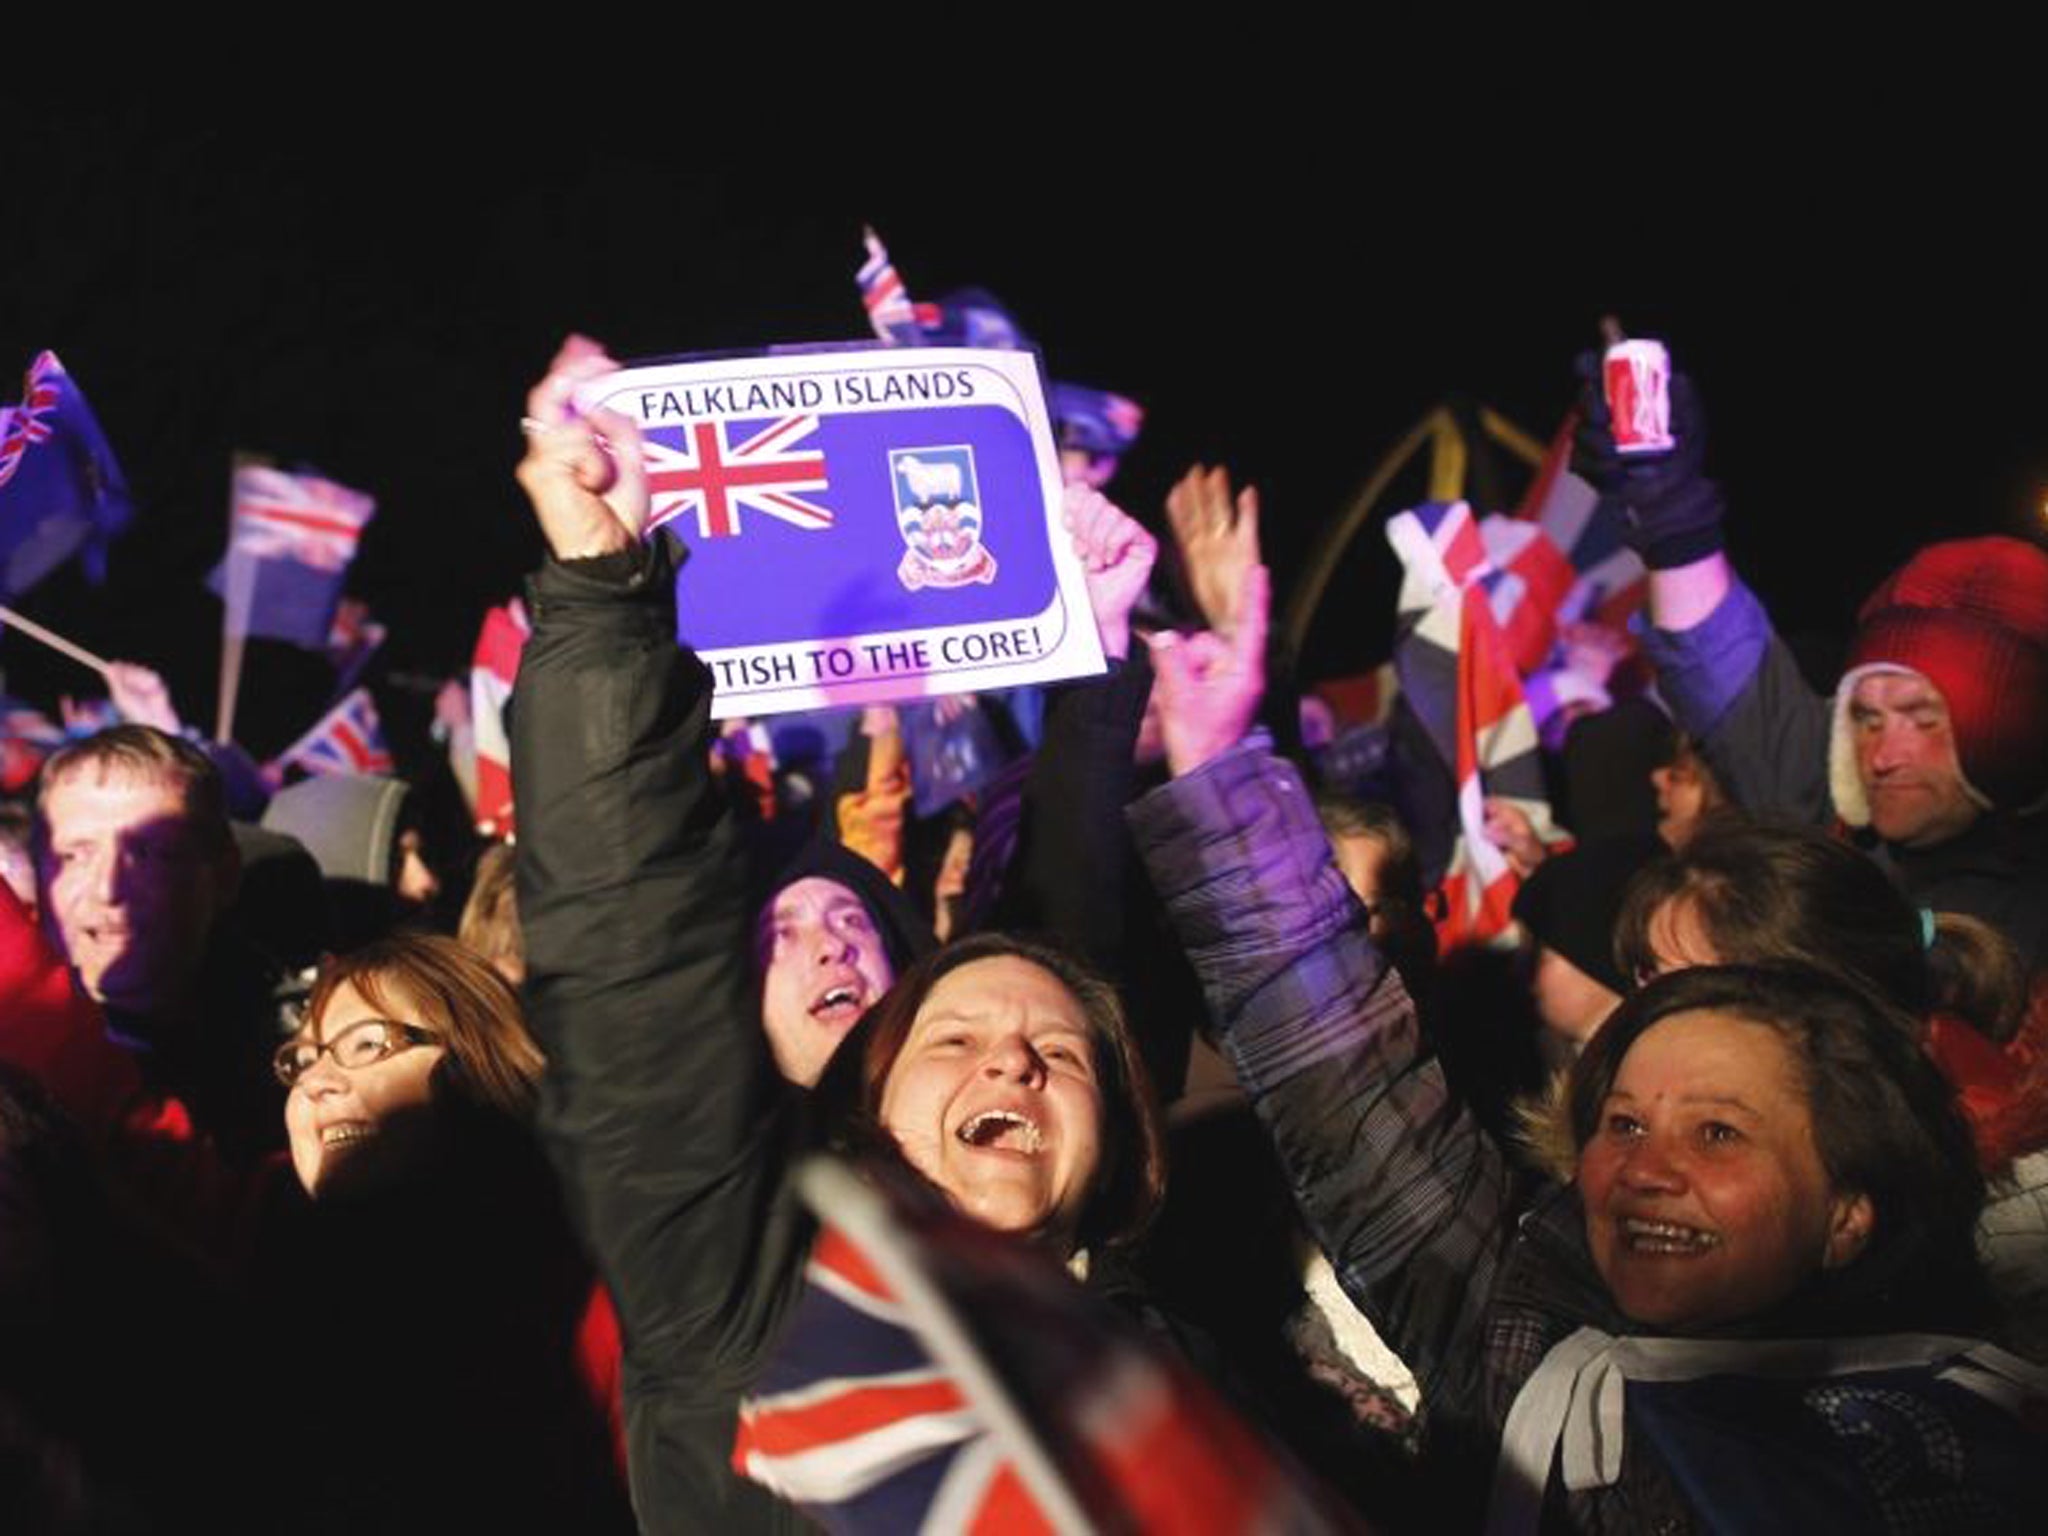 Falkland islanders react after hearing the results of the 2013 referendum affirming Britain's ownership